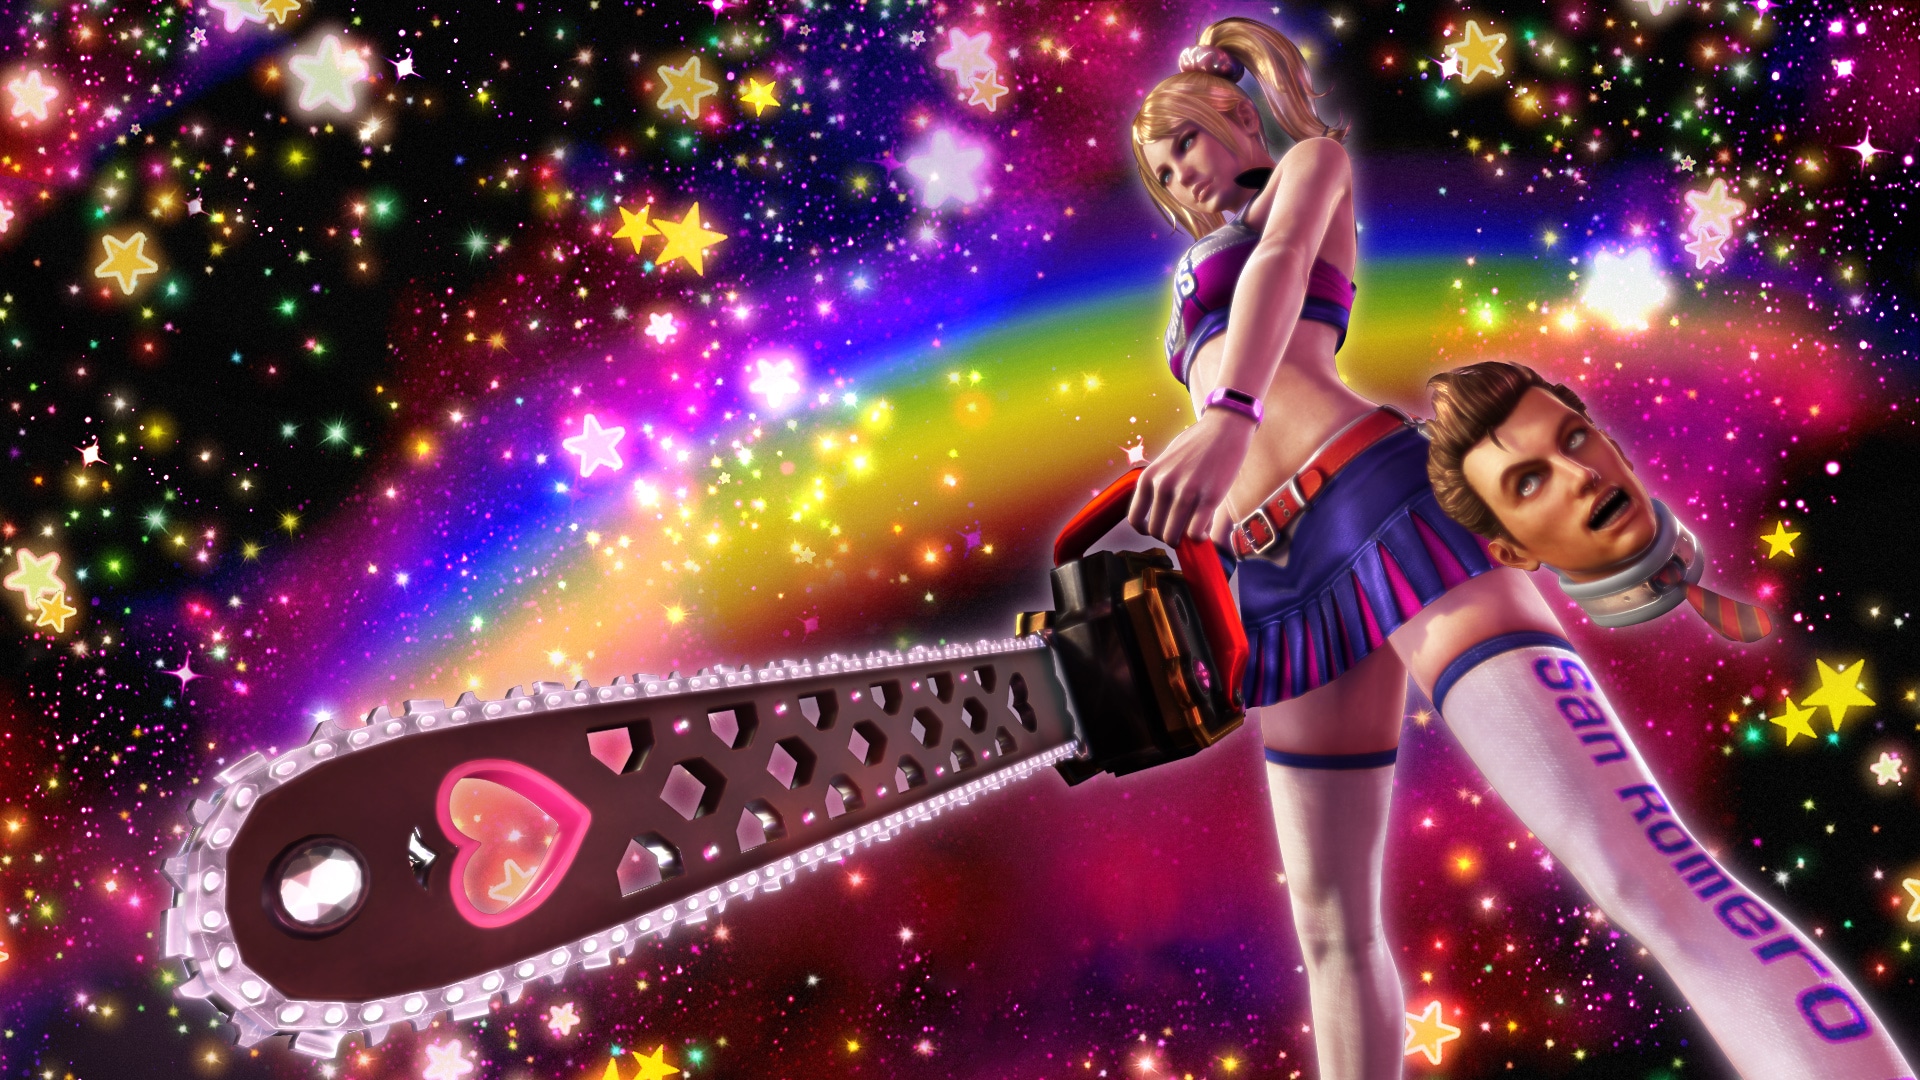 Lollipop Chainsaw remake with 'more realistic' graphics launches next year